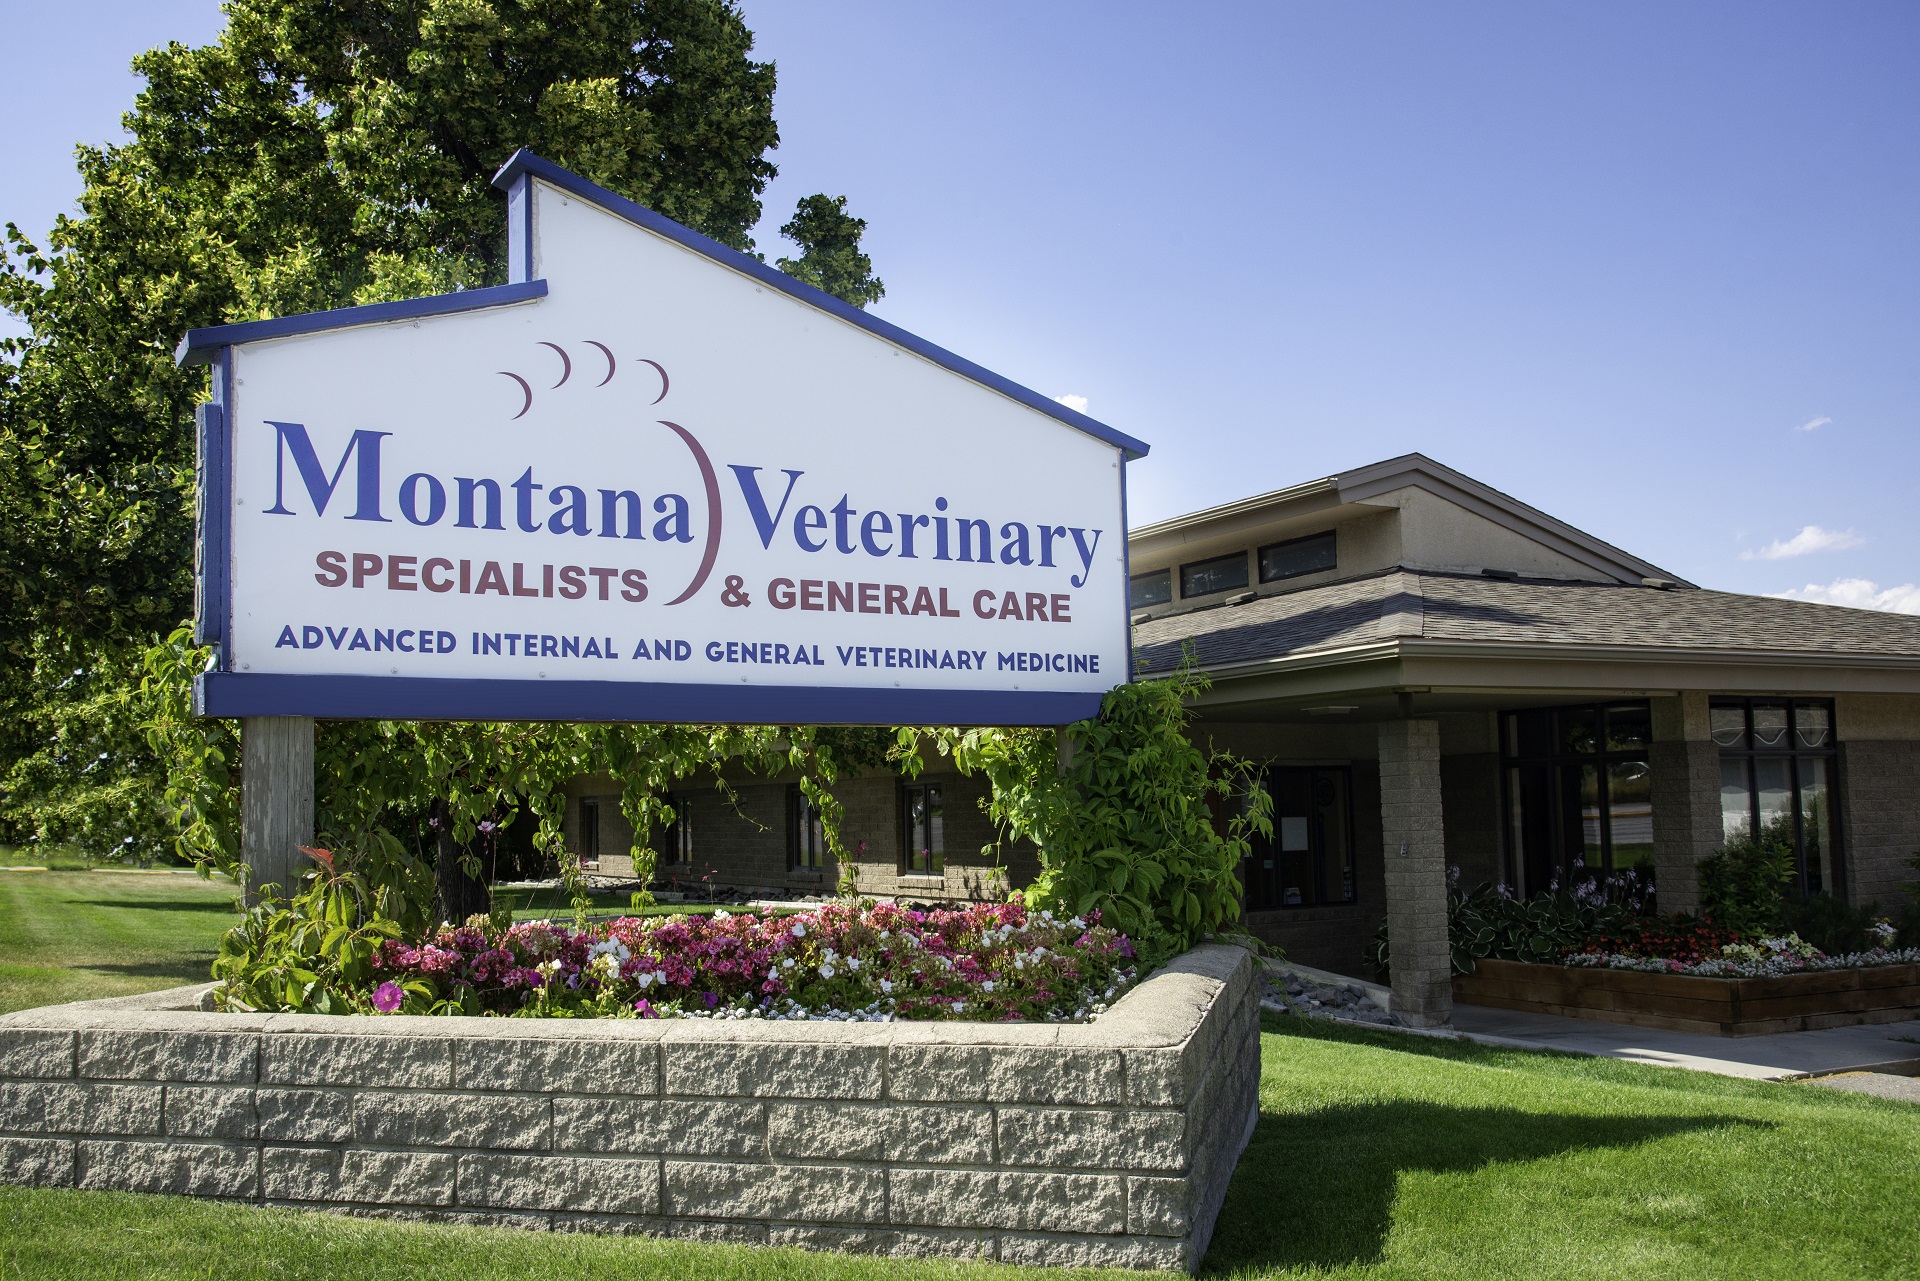 Montana Veterinary Specialists & General Care